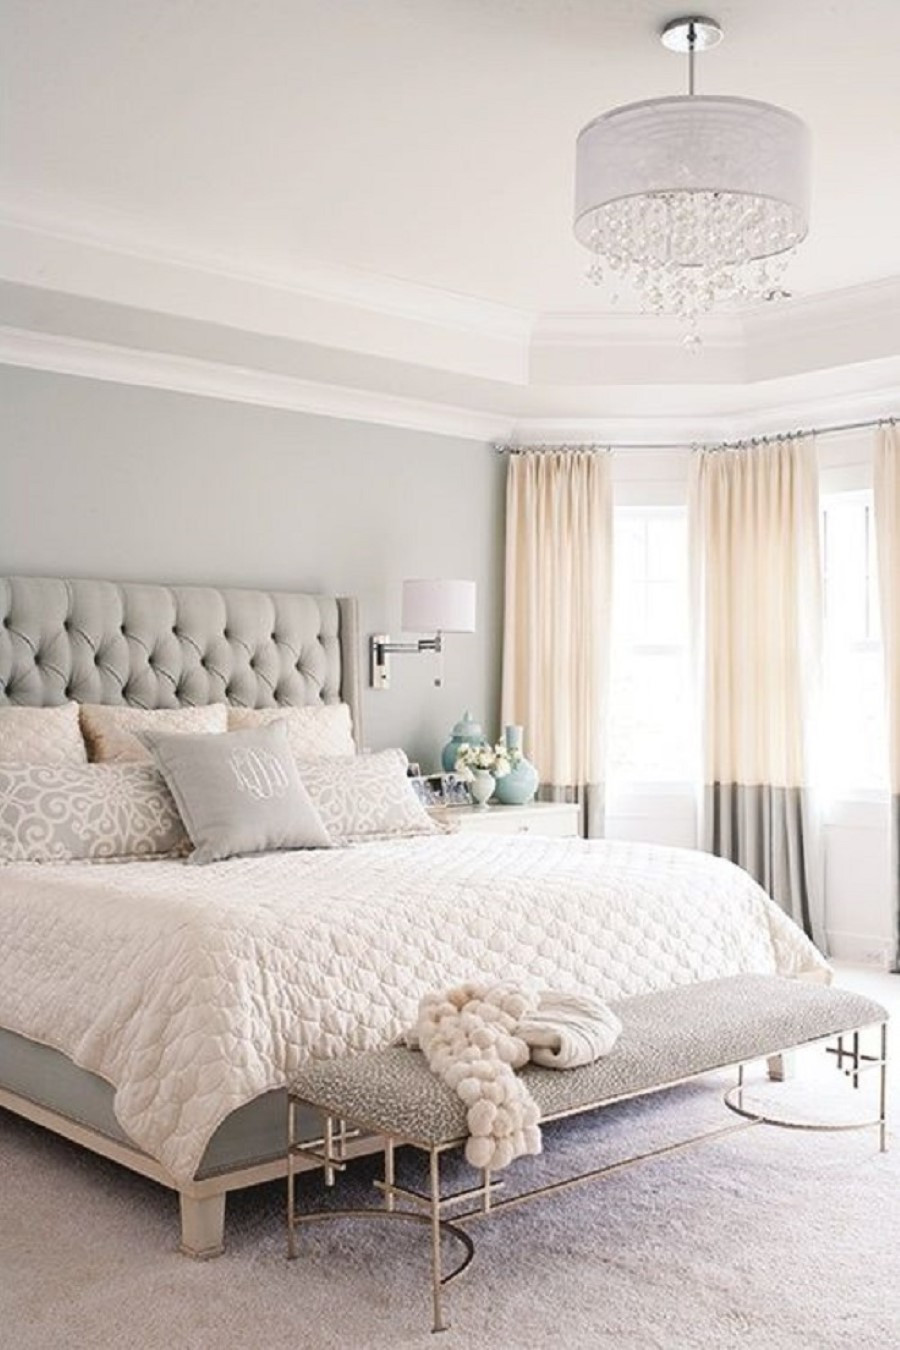 Gray Paint Colors For Bedroom
 Best Paint Colors for Small Room – Some Tips